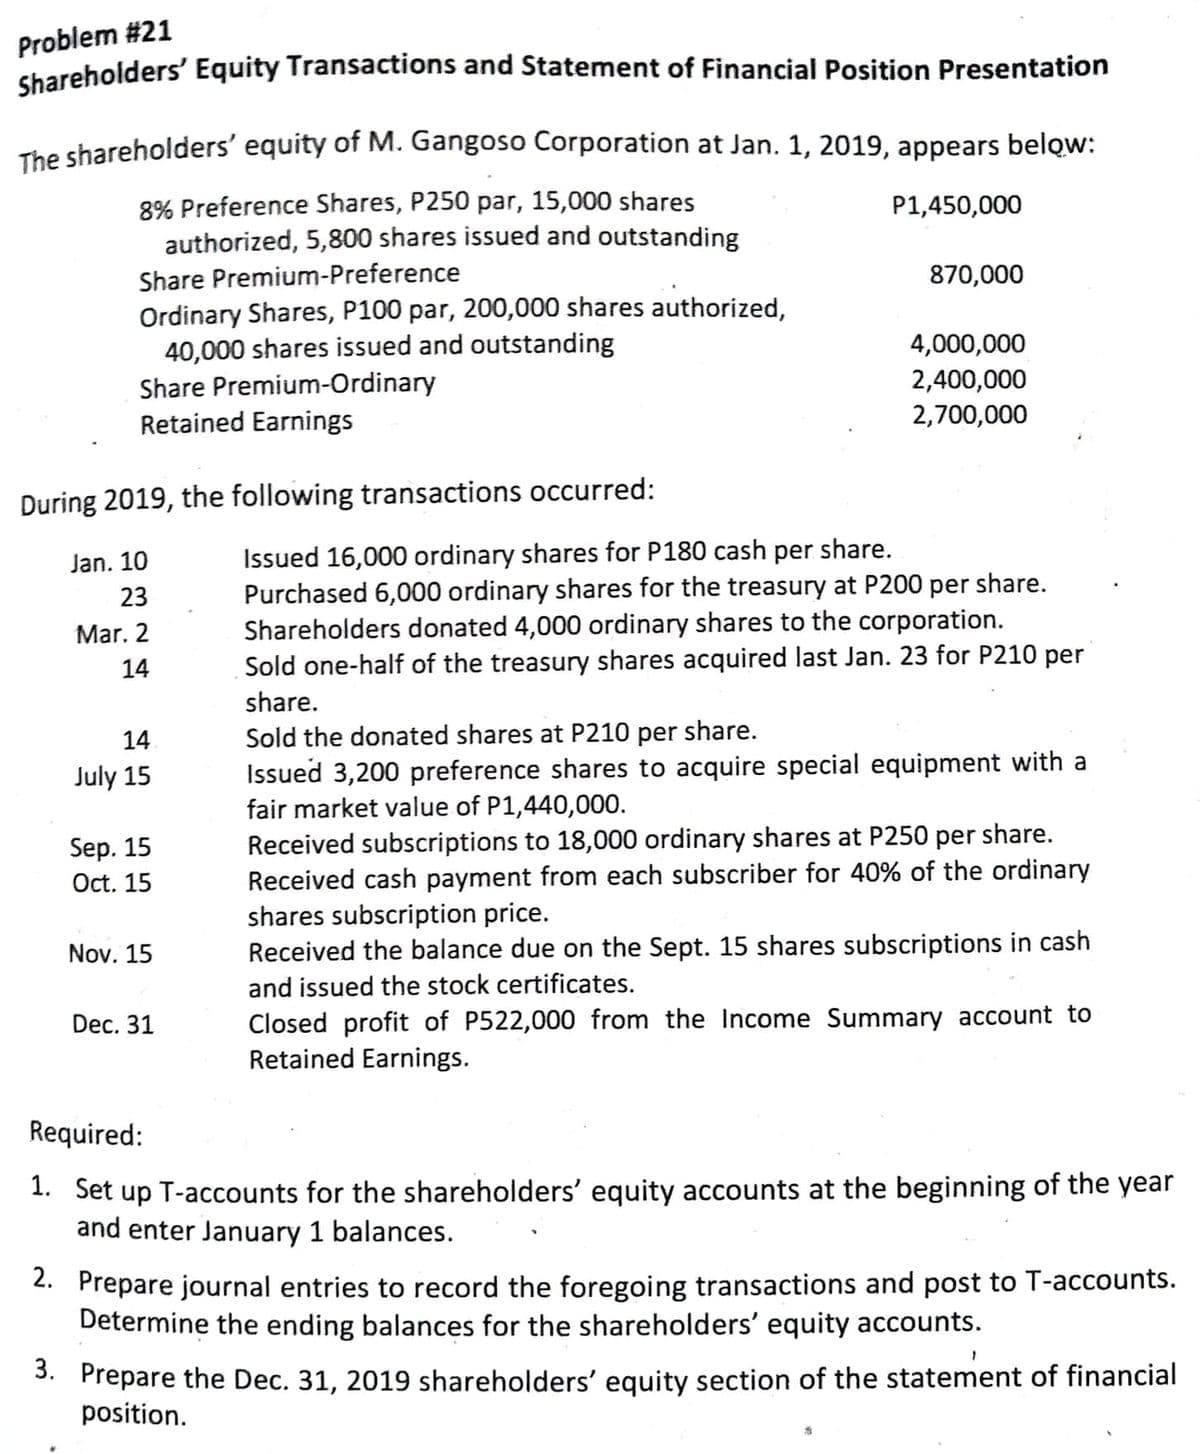 Problem #21
Shareholders' Equity Transactions and Statement of Financial Position Presentation
The shareholders' equity of M. Gangoso Corporation at Jan. 1, 2019, appears below:
8% Preference Shares, P250 par, 15,000 shares
authorized, 5,800 shares issued and outstanding
P1,450,000
Share Premium-Preference
870,000
Ordinary Shares, P100 par, 200,000 shares authorized,
40,000 shares issued and outstanding
Share Premium-Ordinary
Retained Earnings
4,000,000
2,400,000
2,700,000
During 2019, the following transactions occurred:
Issued 16,000 ordinary shares for P180 cash per share.
Purchased 6,000 ordinary shares for the treasury at P200 per share.
Shareholders donated 4,000 ordinary shares to the corporation.
Sold one-half of the treasury shares acquired last Jan. 23 for P210 per
Jan. 10
23
Mar. 2
14
share.
Sold the donated shares at P210 per share.
Issued 3,200 preference shares to acquire special equipment with a
fair market value of P1,440,000.
14
July 15
Received subscriptions to 18,000 ordinary shares at P250 per share.
Received cash payment from each subscriber for 40% of the ordinary
shares subscription price.
Received the balance due on the Sept. 15 shares subscriptions in cash
and issued the stock certificates.
Sep. 15
Oct. 15
Nov. 15
Closed profit of P522,000 from the Income Summary account to
Retained Earnings.
Dec. 31
Required:
1. Set up T-accounts for the shareholders' equity accounts at the beginning of the year
and enter January 1 balances.
2. Prepare journal entries to record the foregoing transactions and post to T-accounts.
Determine the ending balances for the shareholders' equity accounts.
3. Prepare the Dec. 31, 2019 shareholders' equity section of the statement of financial
position.
